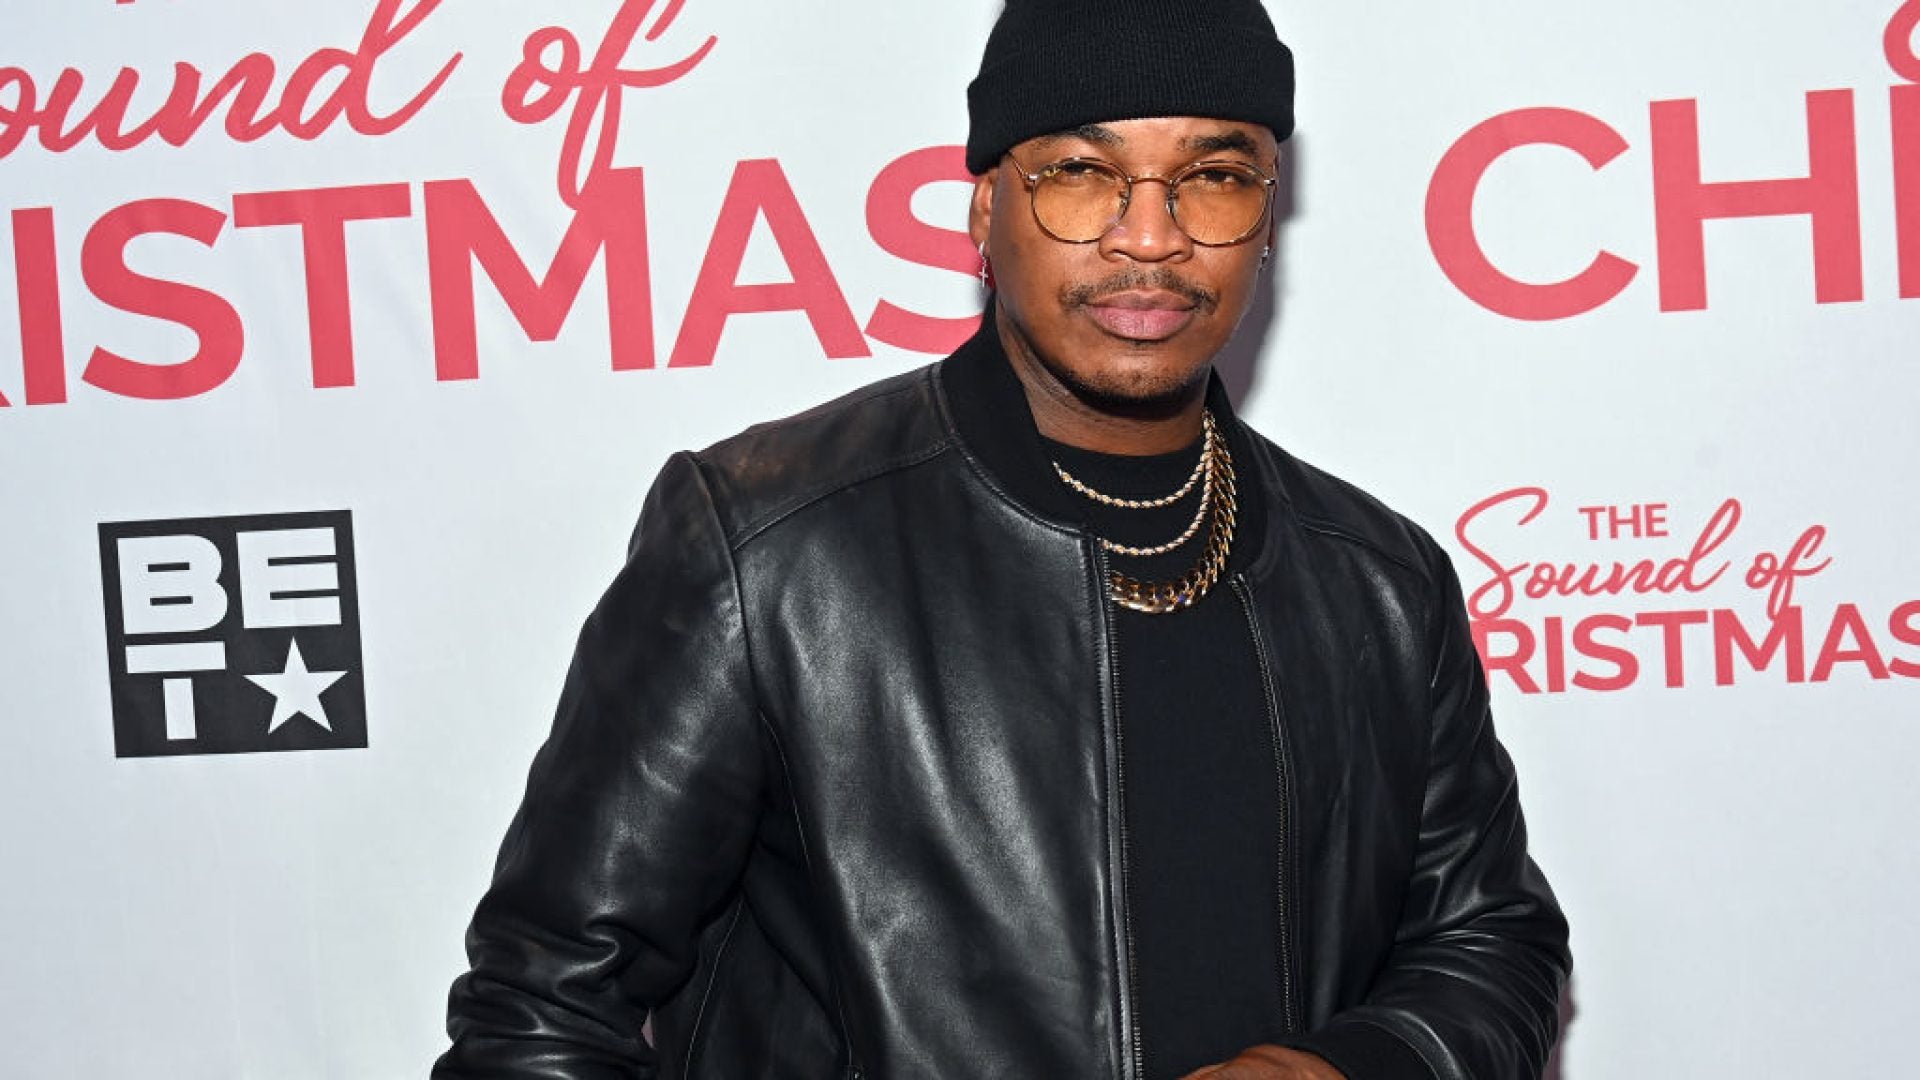 'He Can’t Drive A Car Yet But He Can Decide His Sex?’ Ne-Yo Sorry After Chiding Parents Who Allow Kids To Choose Gender